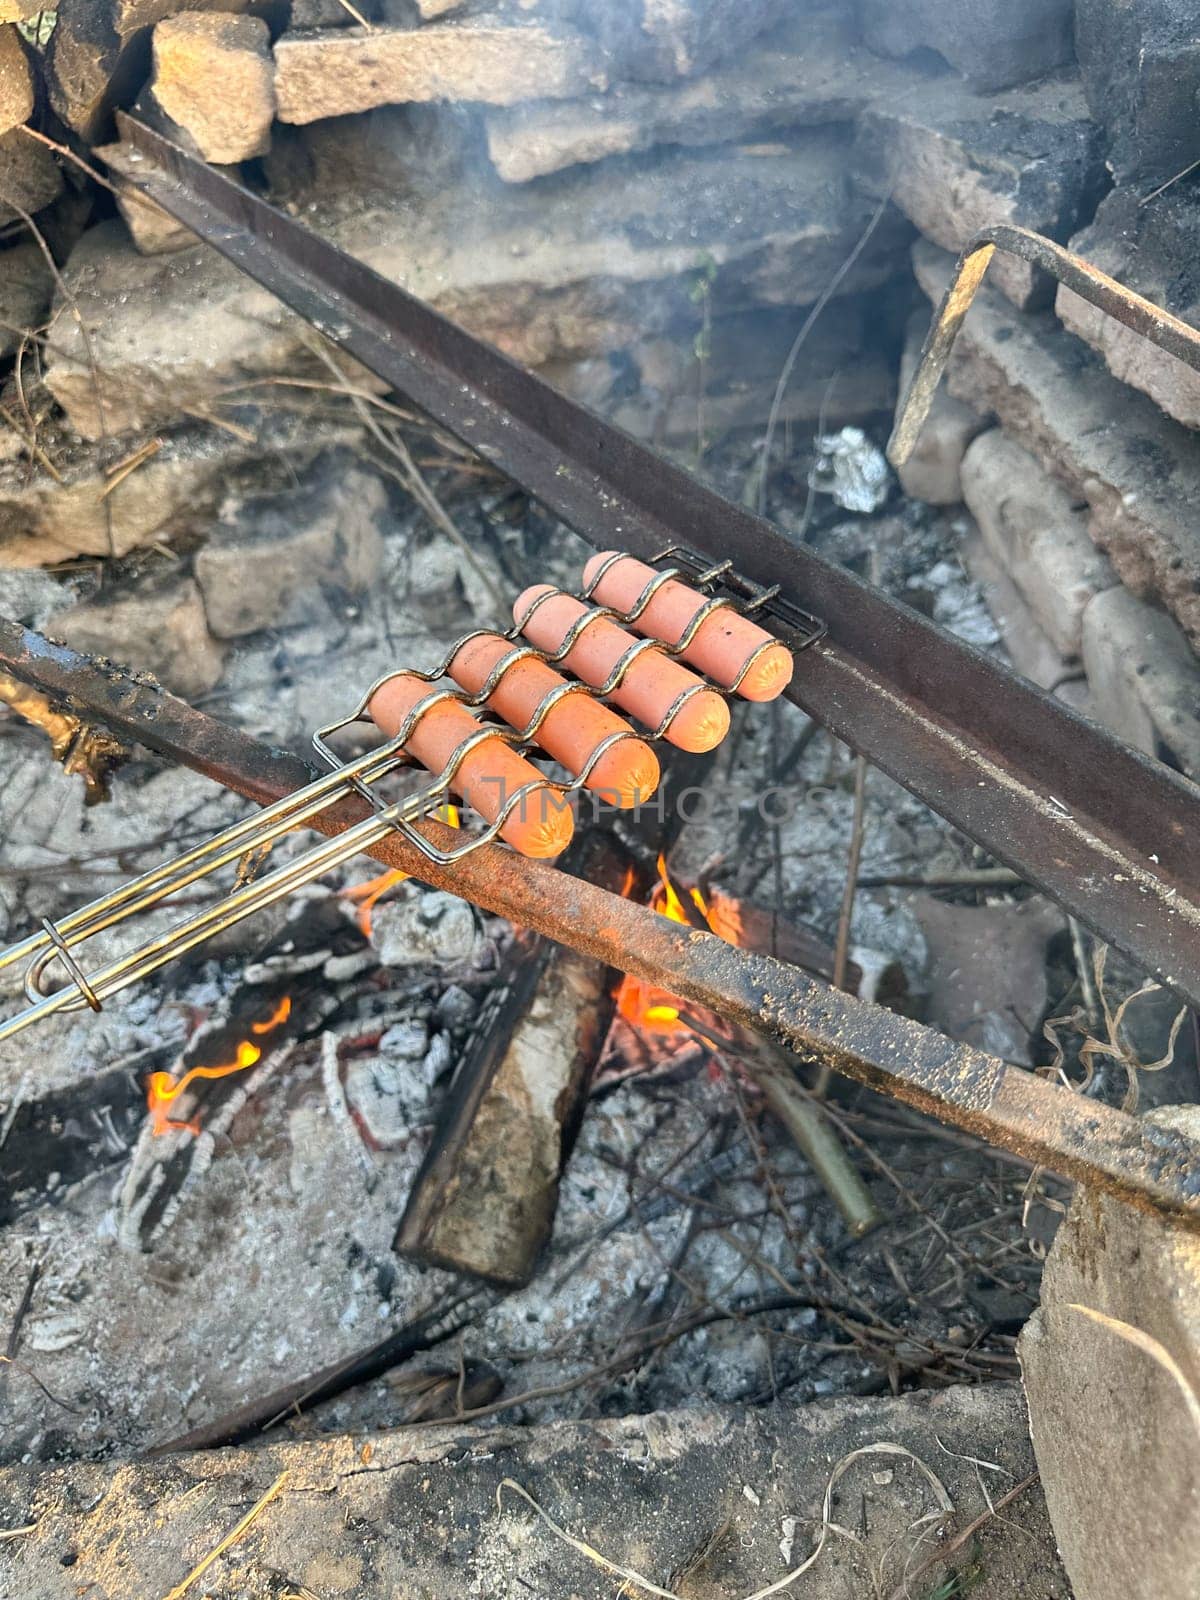 sausages roasting on a fire in summer